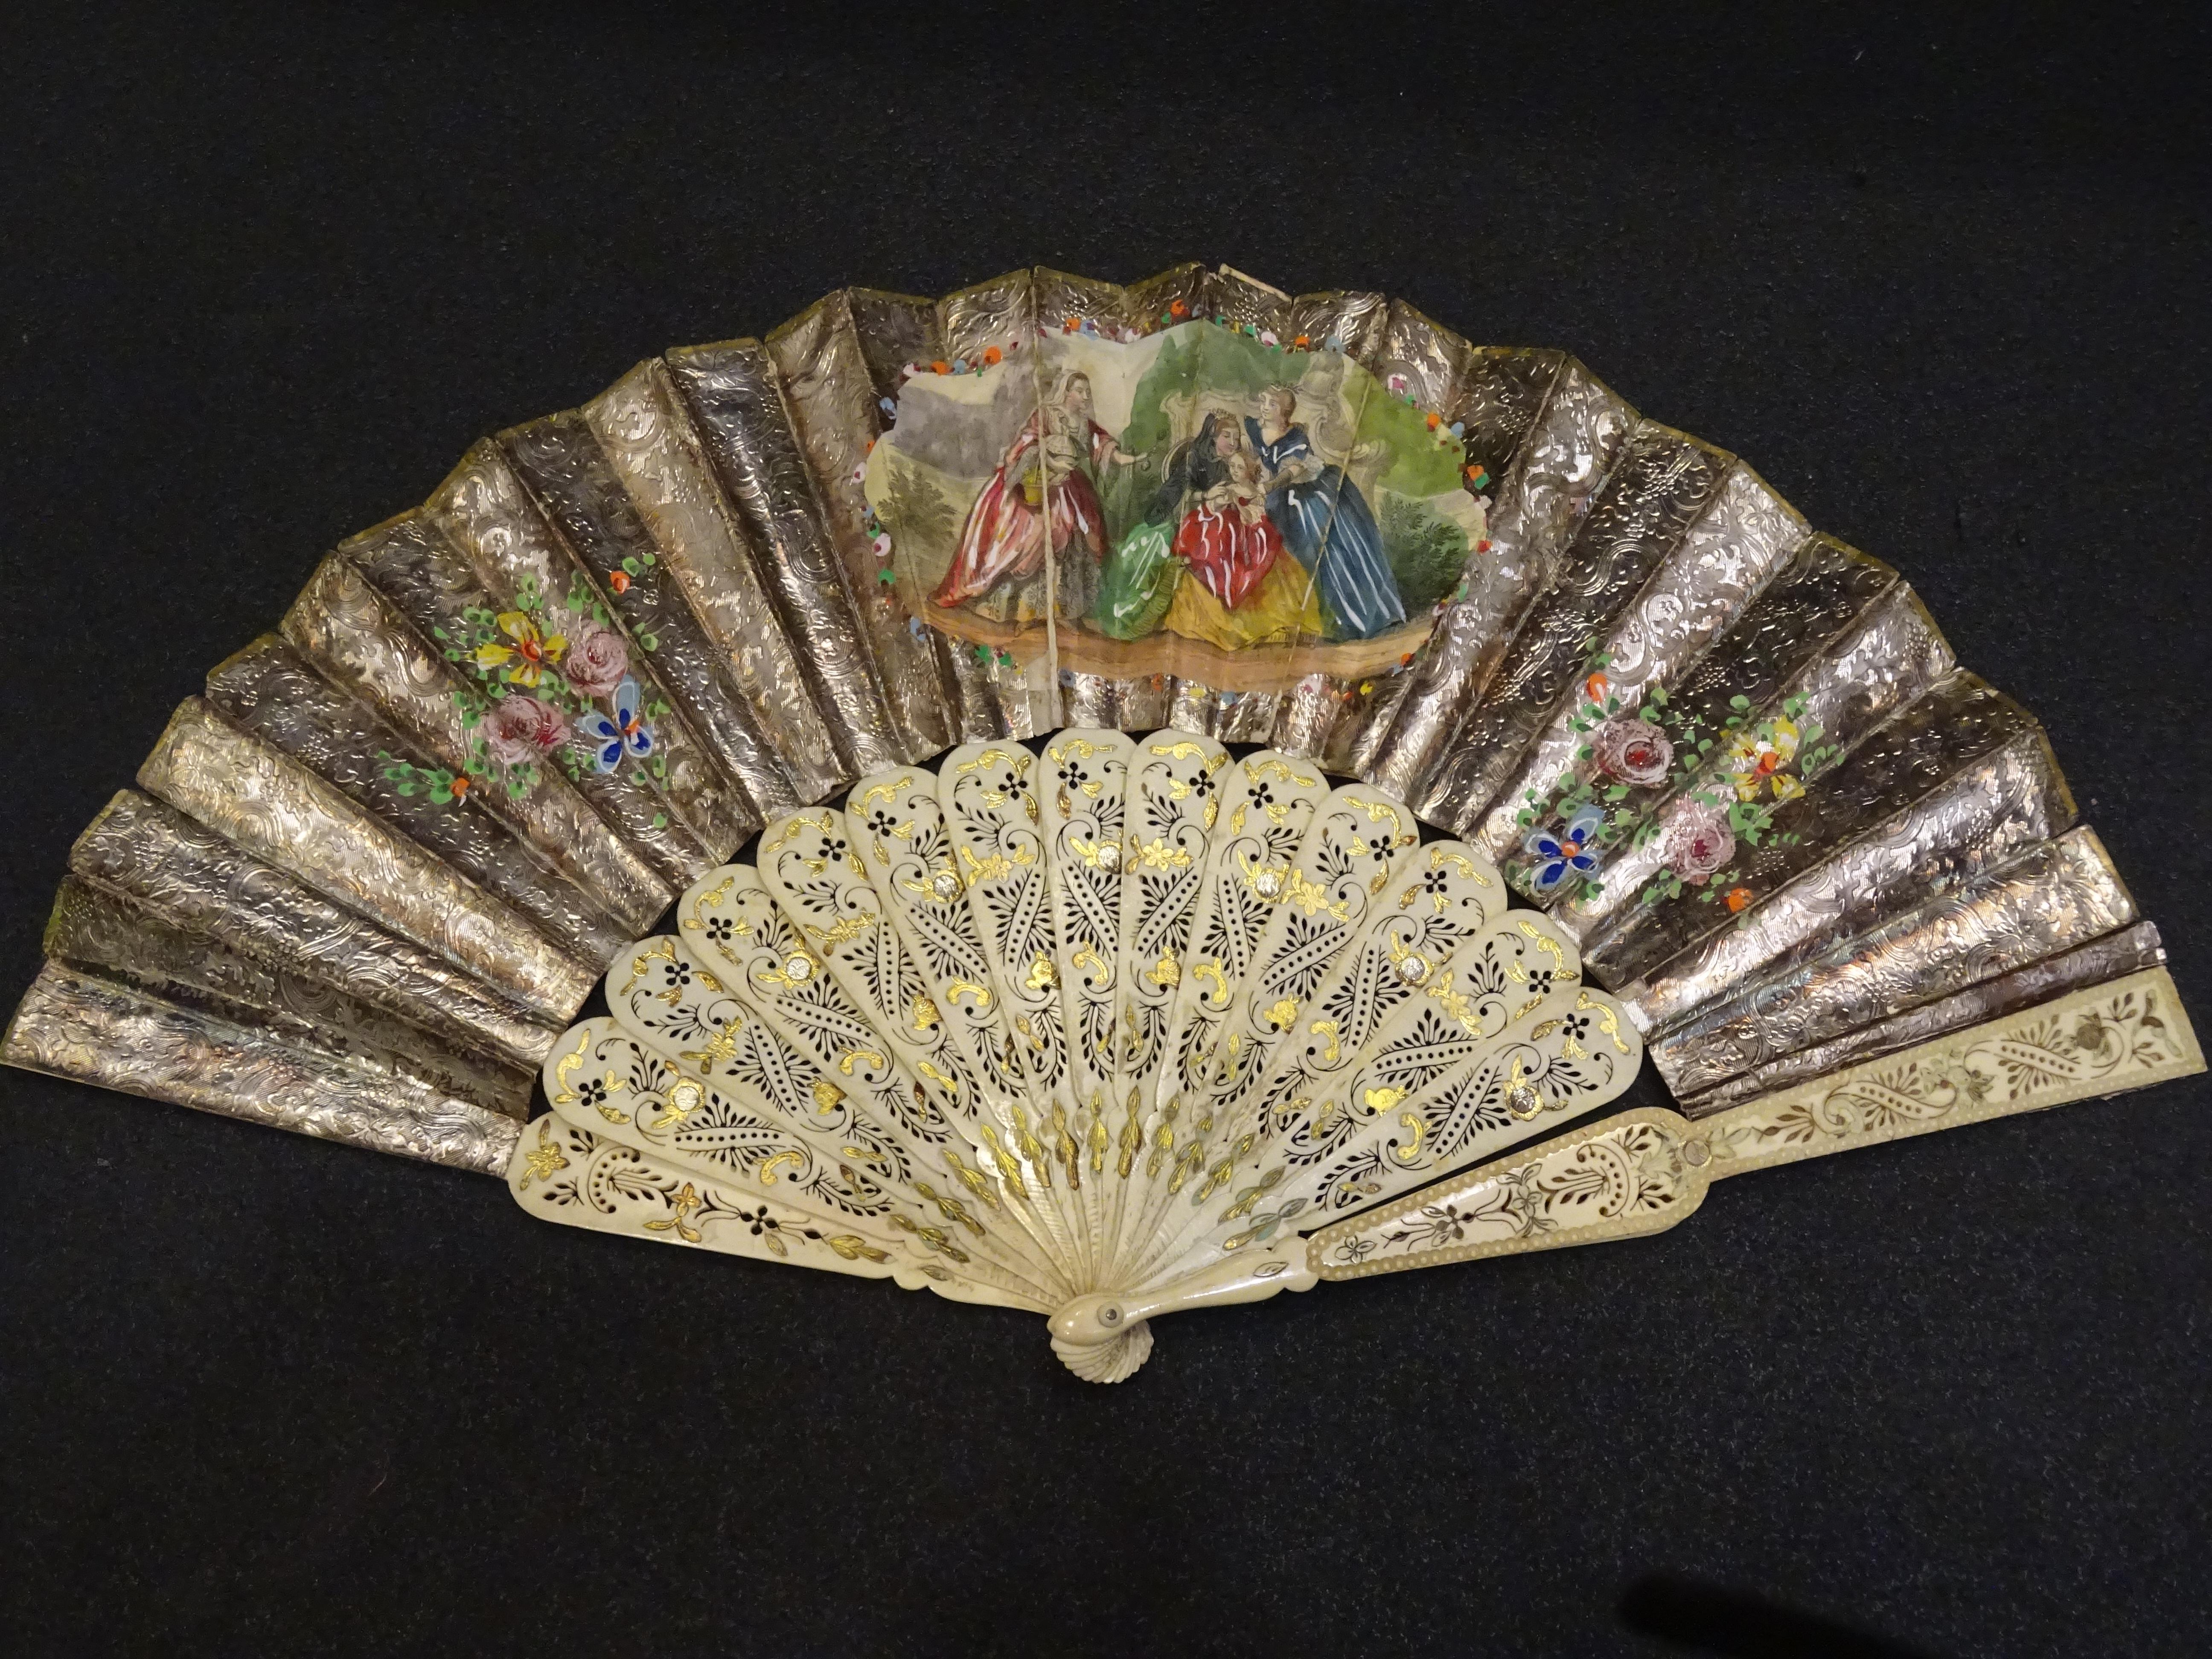 Amazing 19th century Spanish gold and silver with corla paper fan!! With printed and colored customs and romantics scenes, the linkage is in die-cut bone with floral motifs and enriched with gold.
Is a really work of art, unique, very difficult to